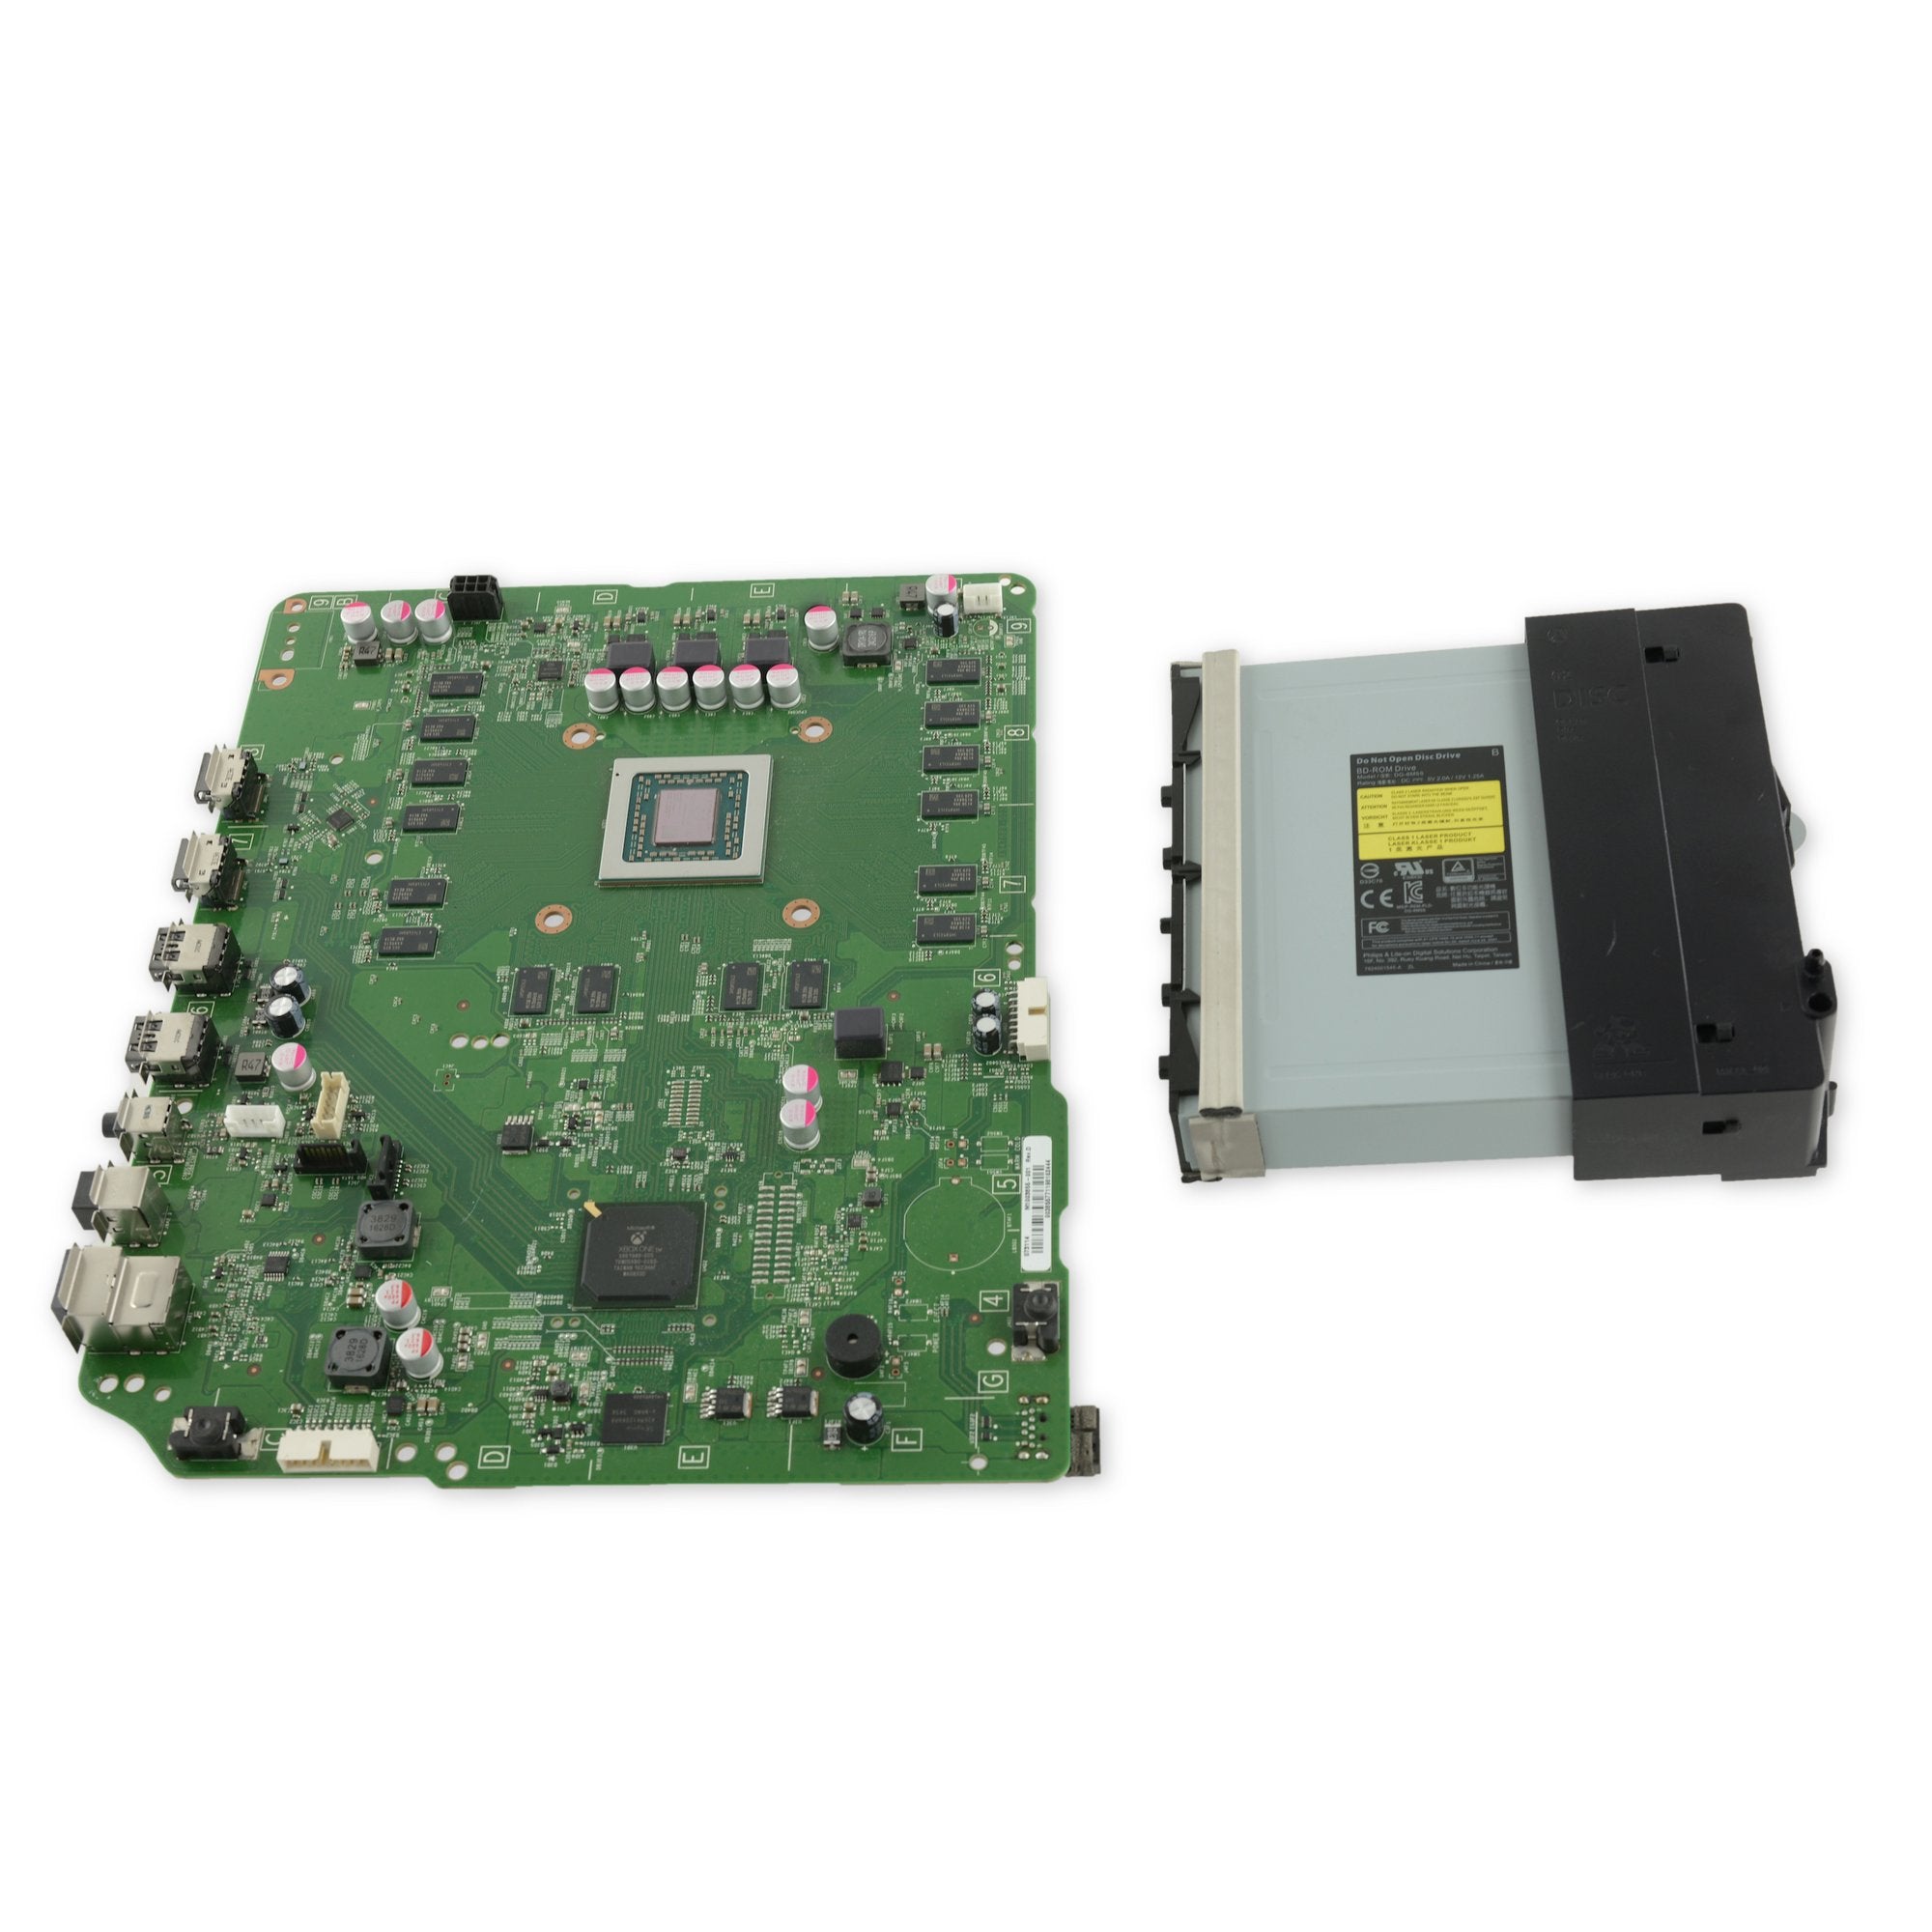 Xbox One S Motherboard and Paired Optical Drive